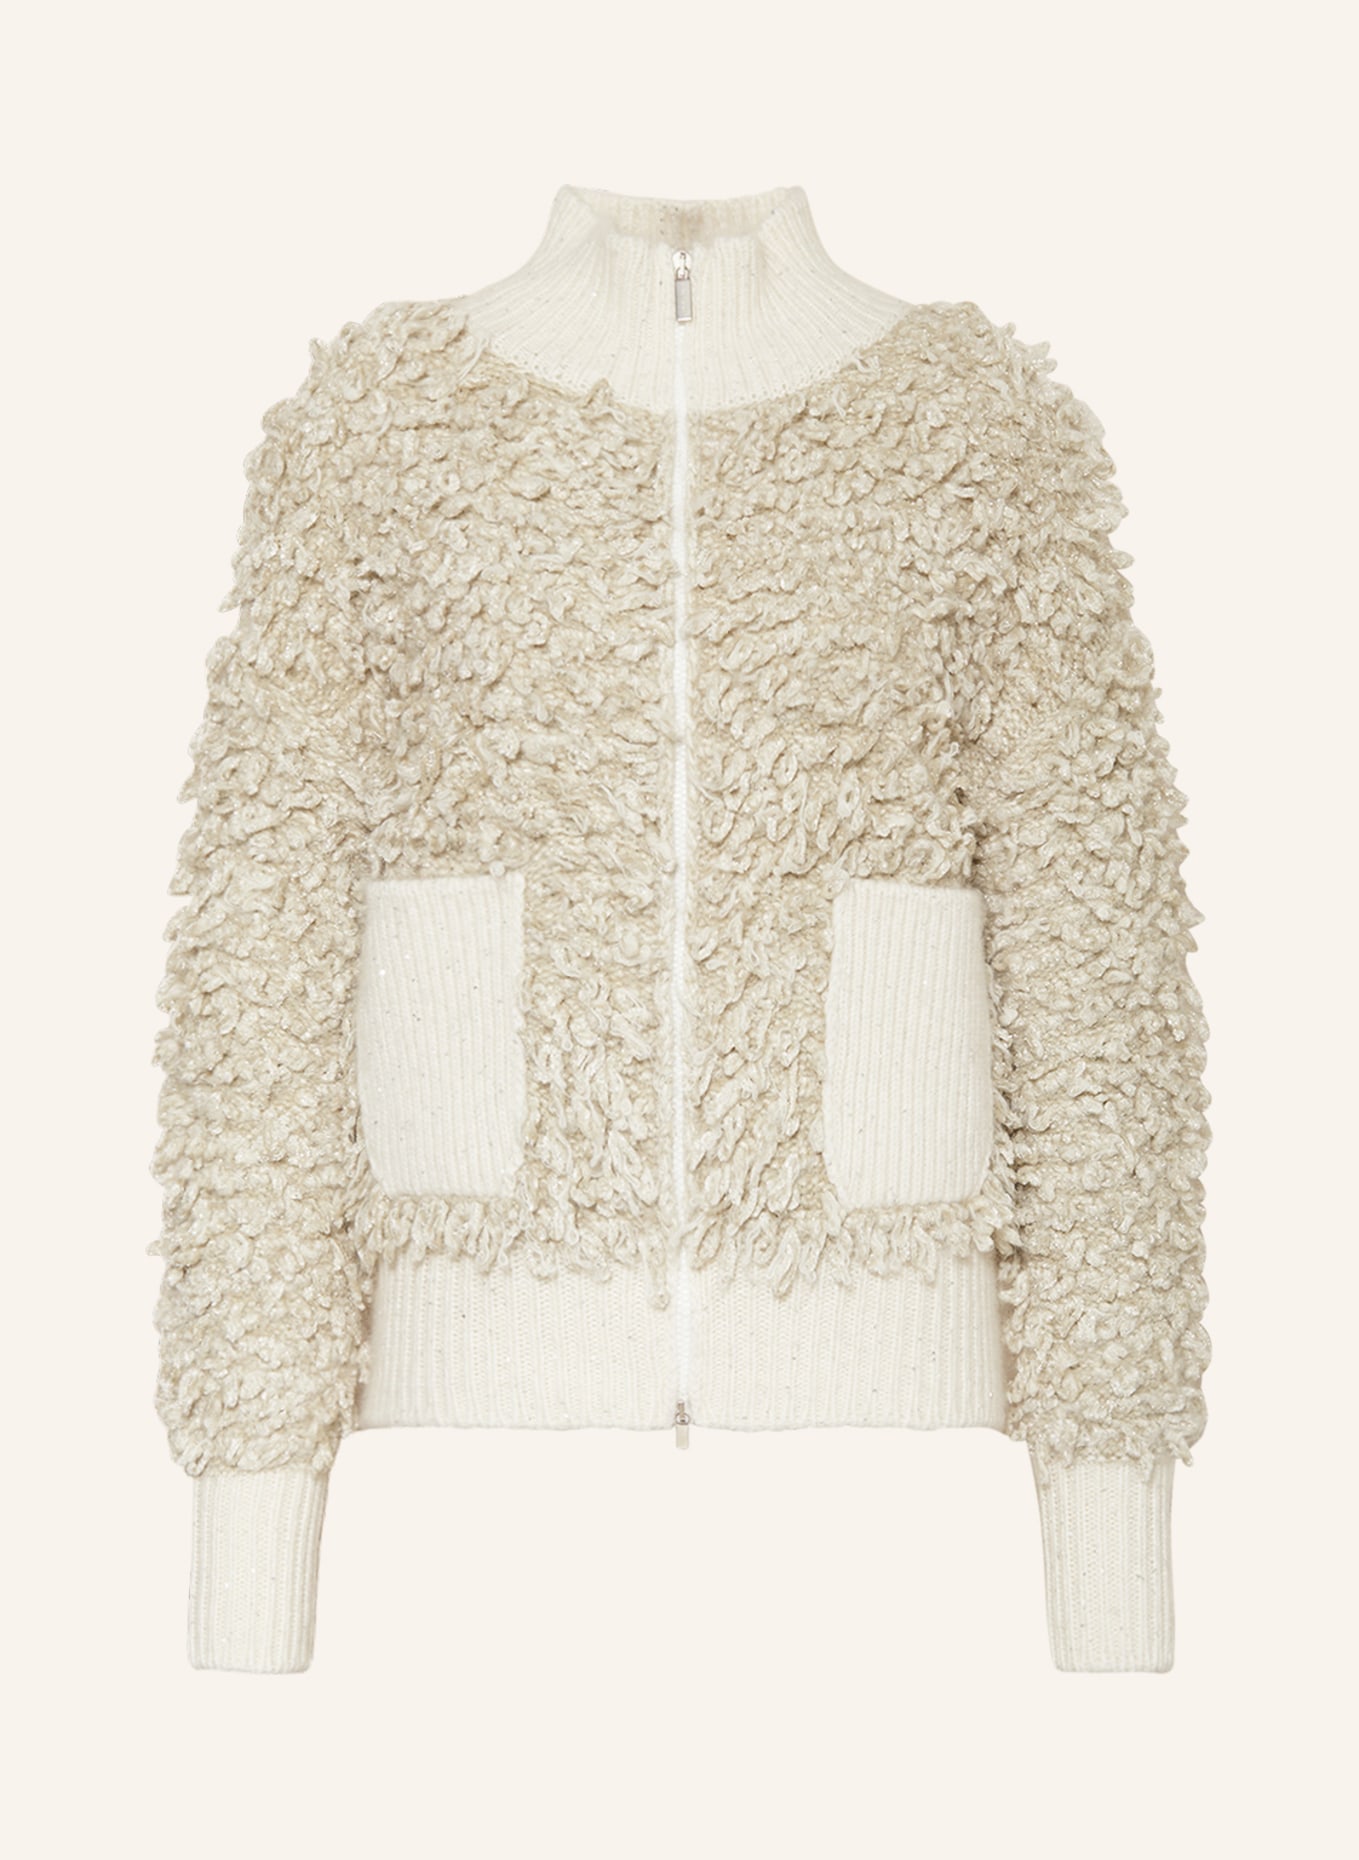 FABIANA FILIPPI Cardigan with glitter thread and Sequins, Color: WHITE/ LIGHT GRAY/ SILVER (Image 1)